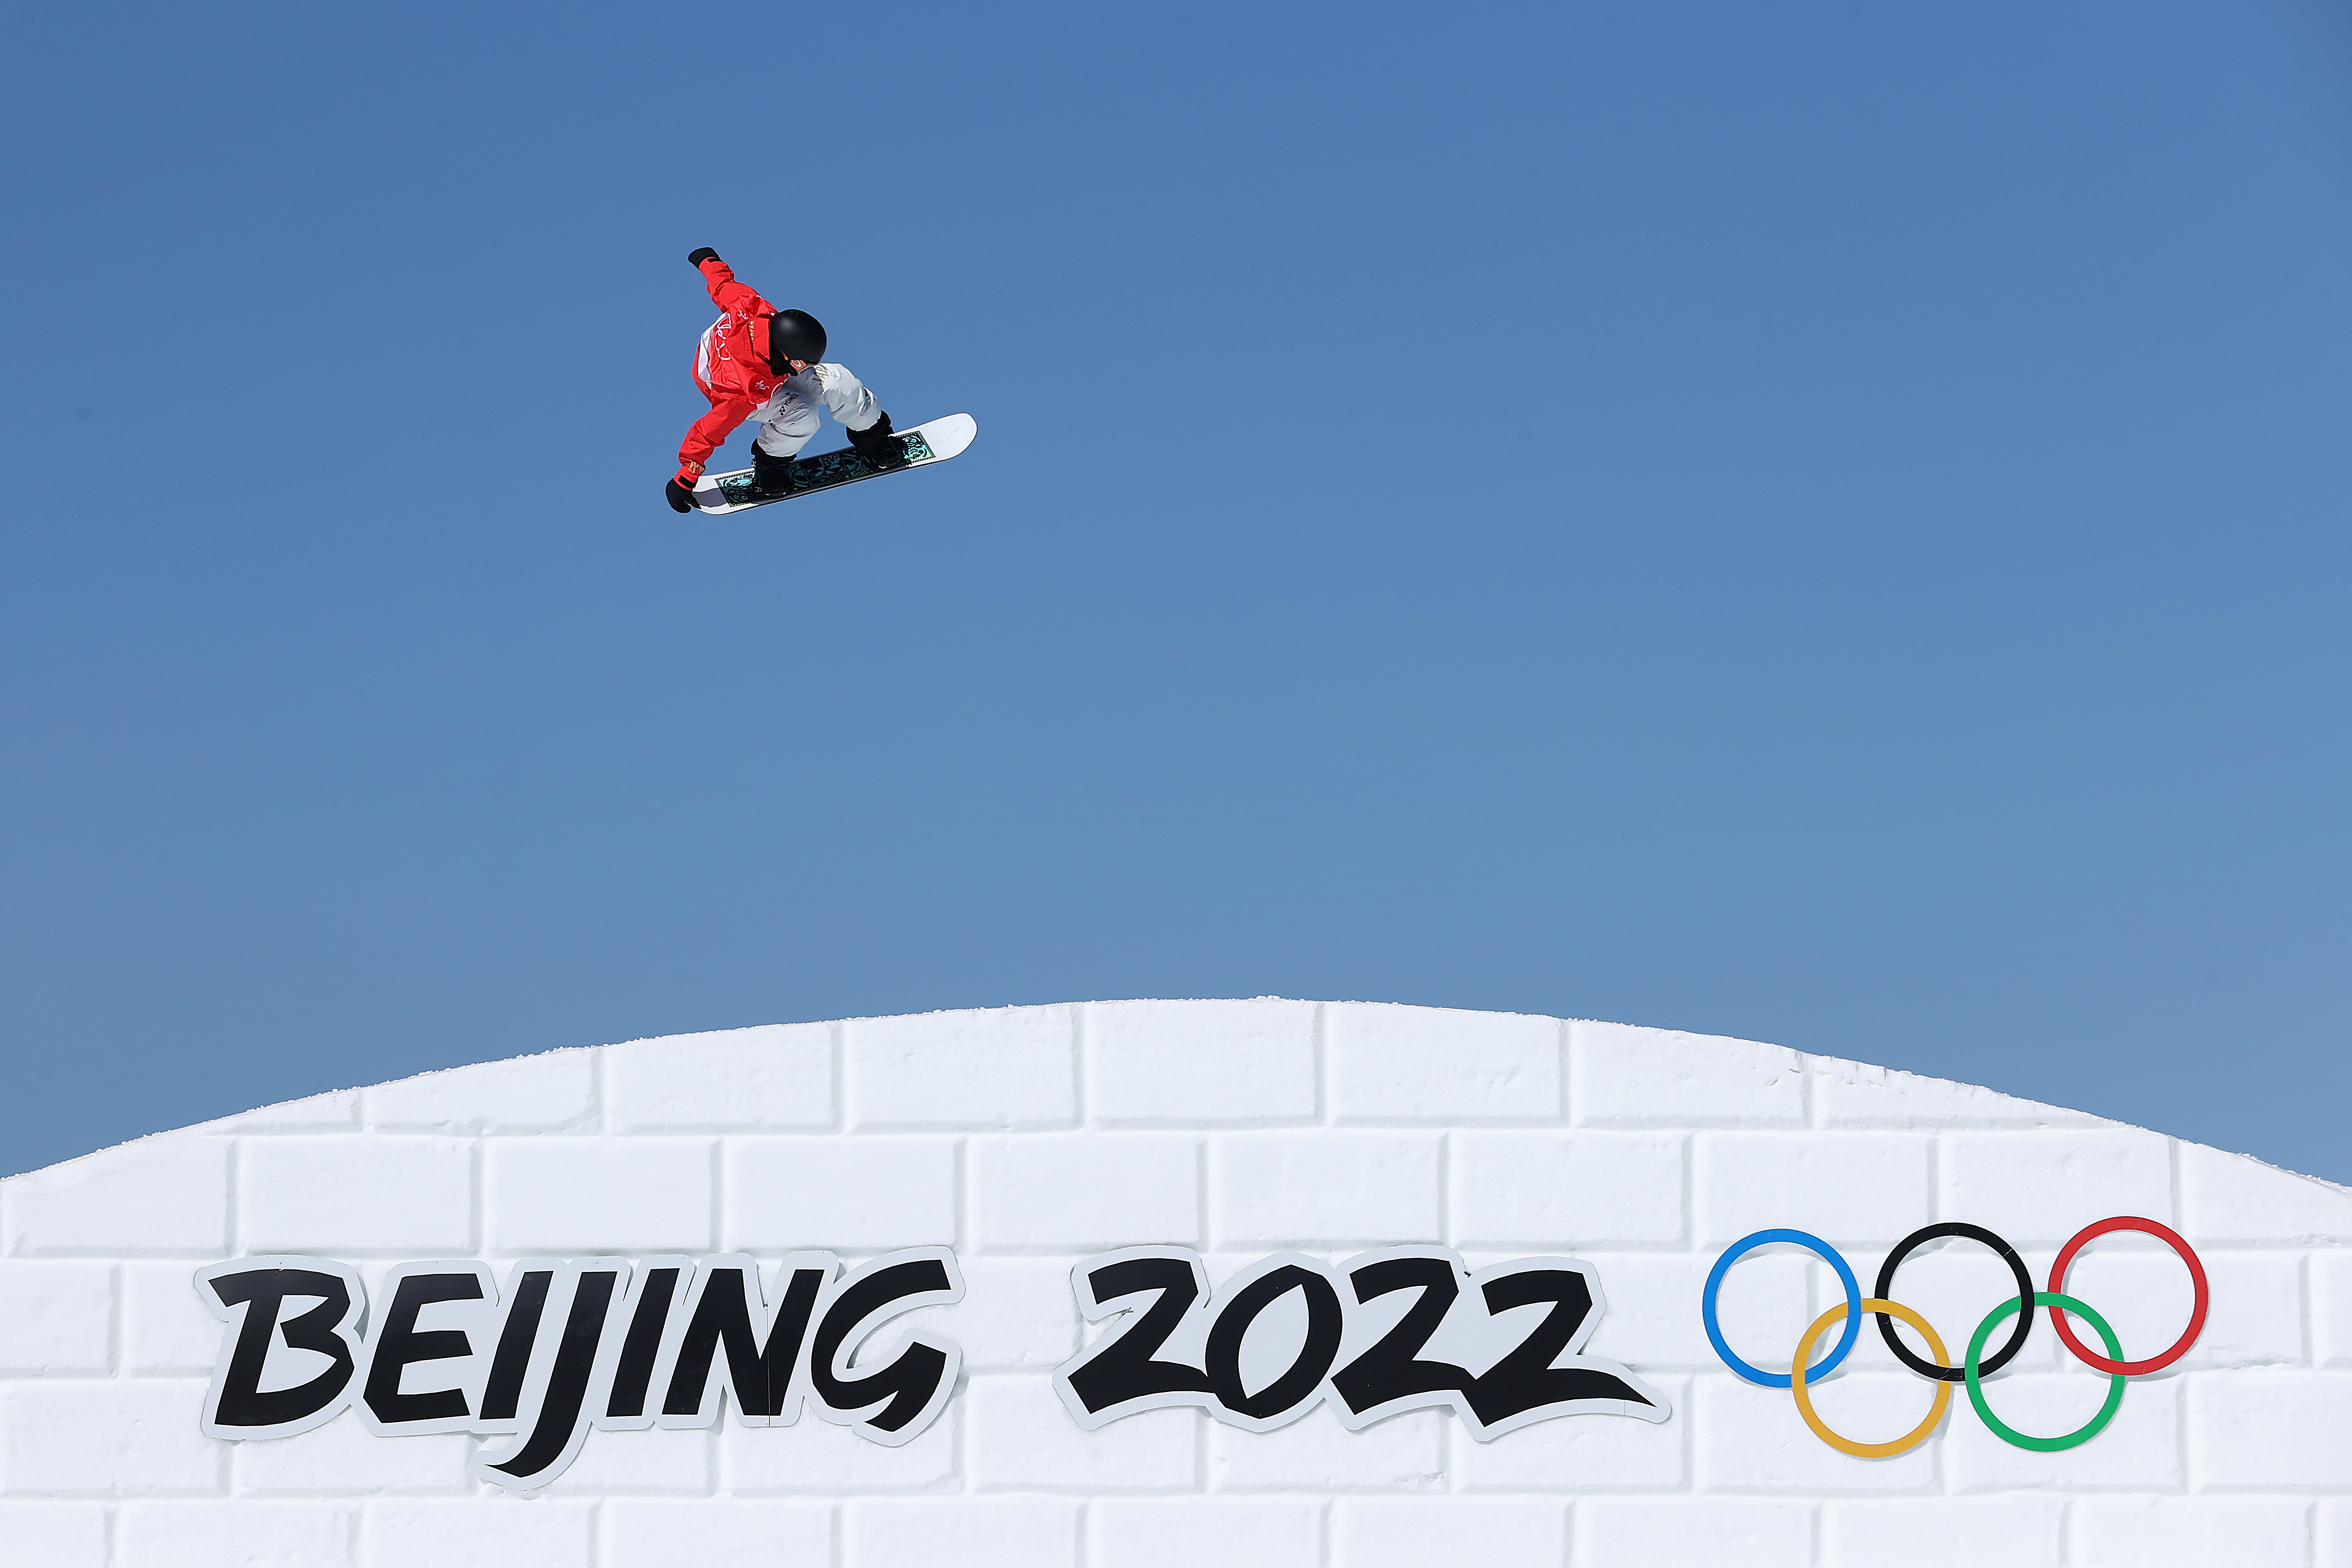 Japan's Kokomo Murase performs a trick during the women's snowboard slopestyle qualification on February 5.